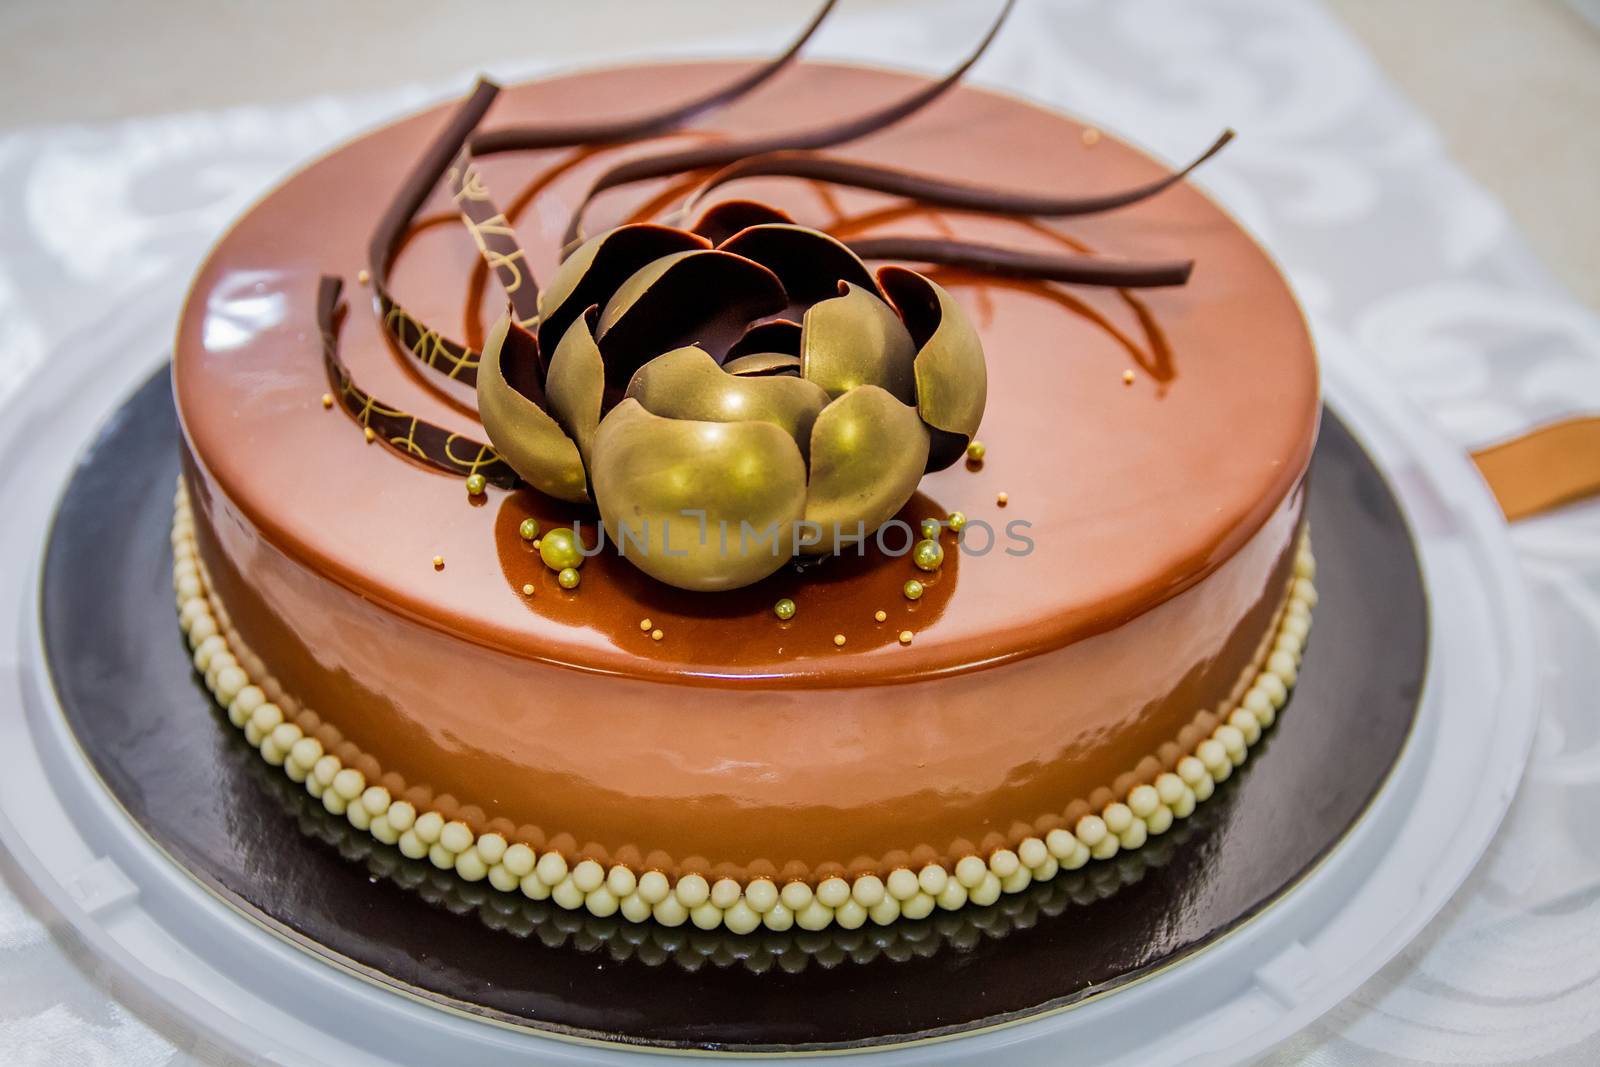 Golden chocolate cake with flower and pearls by Angel_a